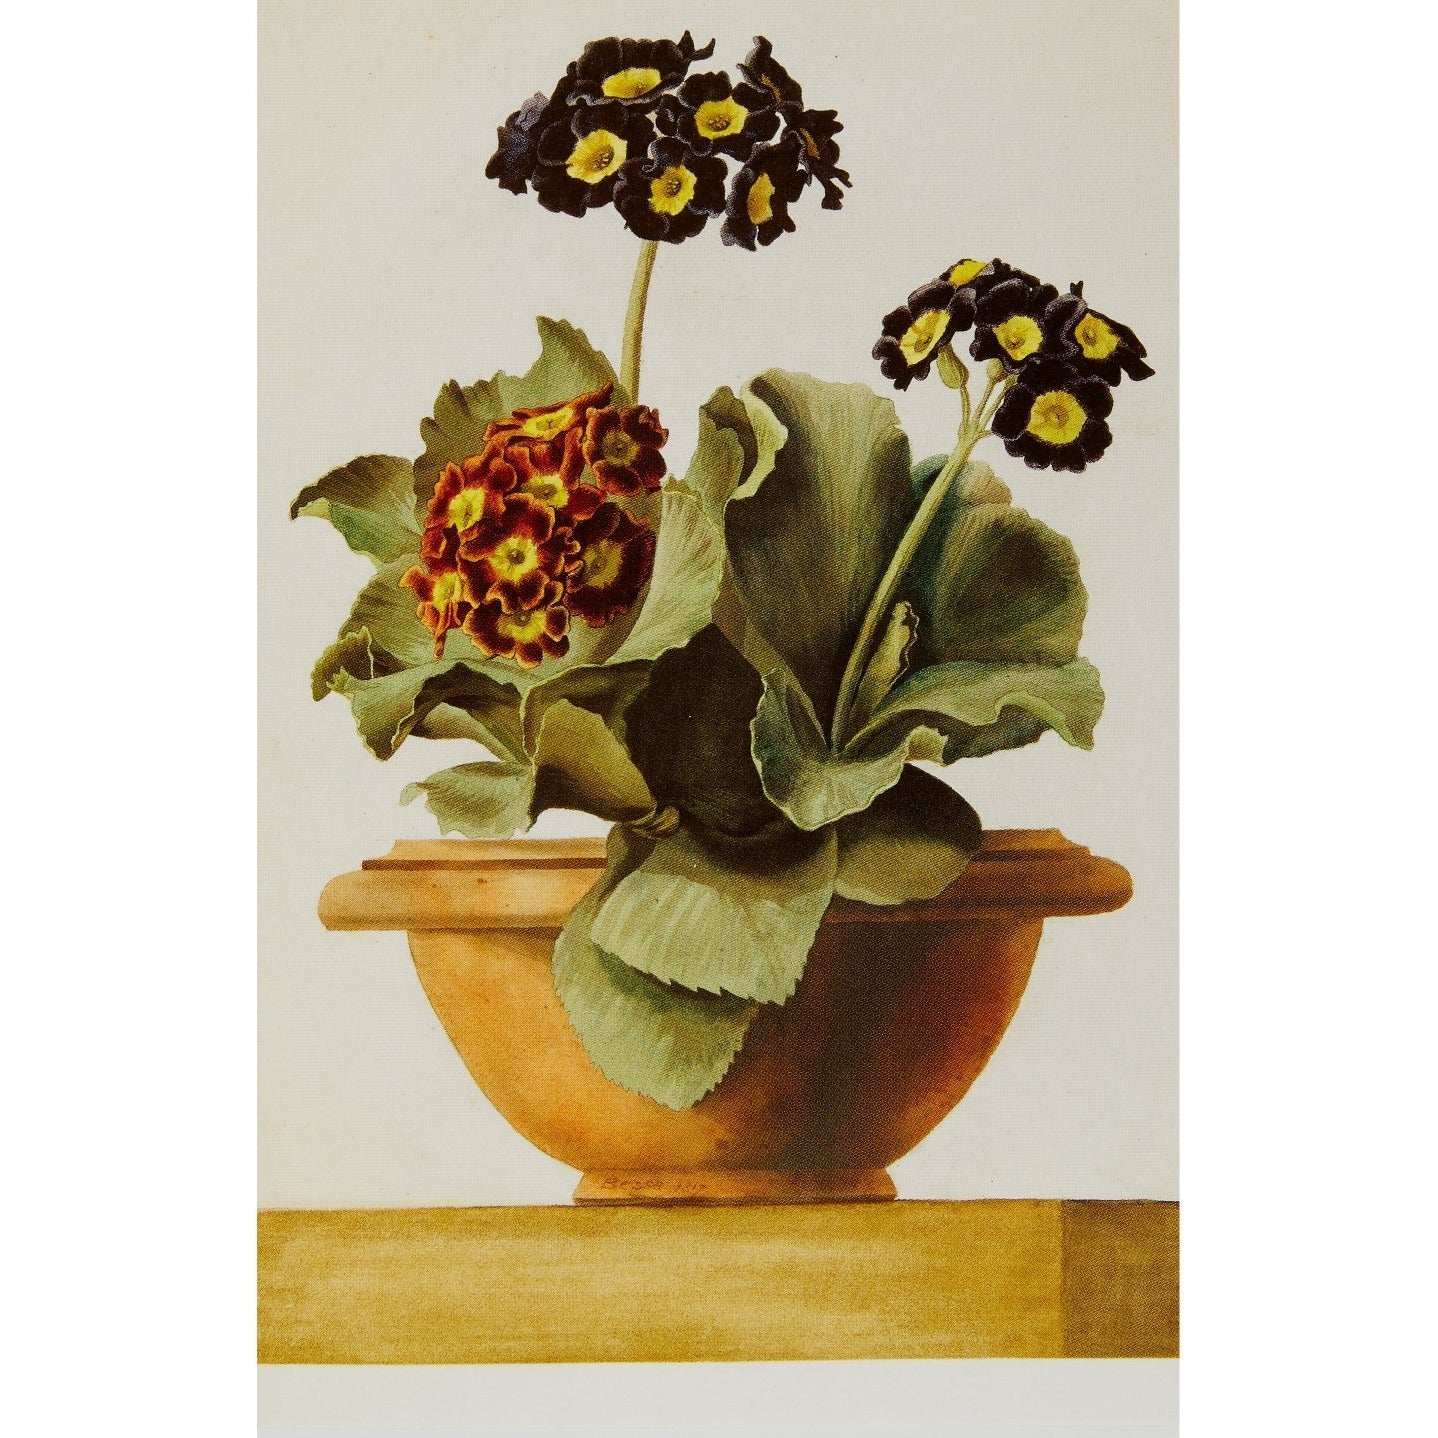 Notecard - Potted Primulas by Pancrace Bessa. From the Broughton Collection of the Fitzwilliam Museum, brought to you by CuratingCambridge.